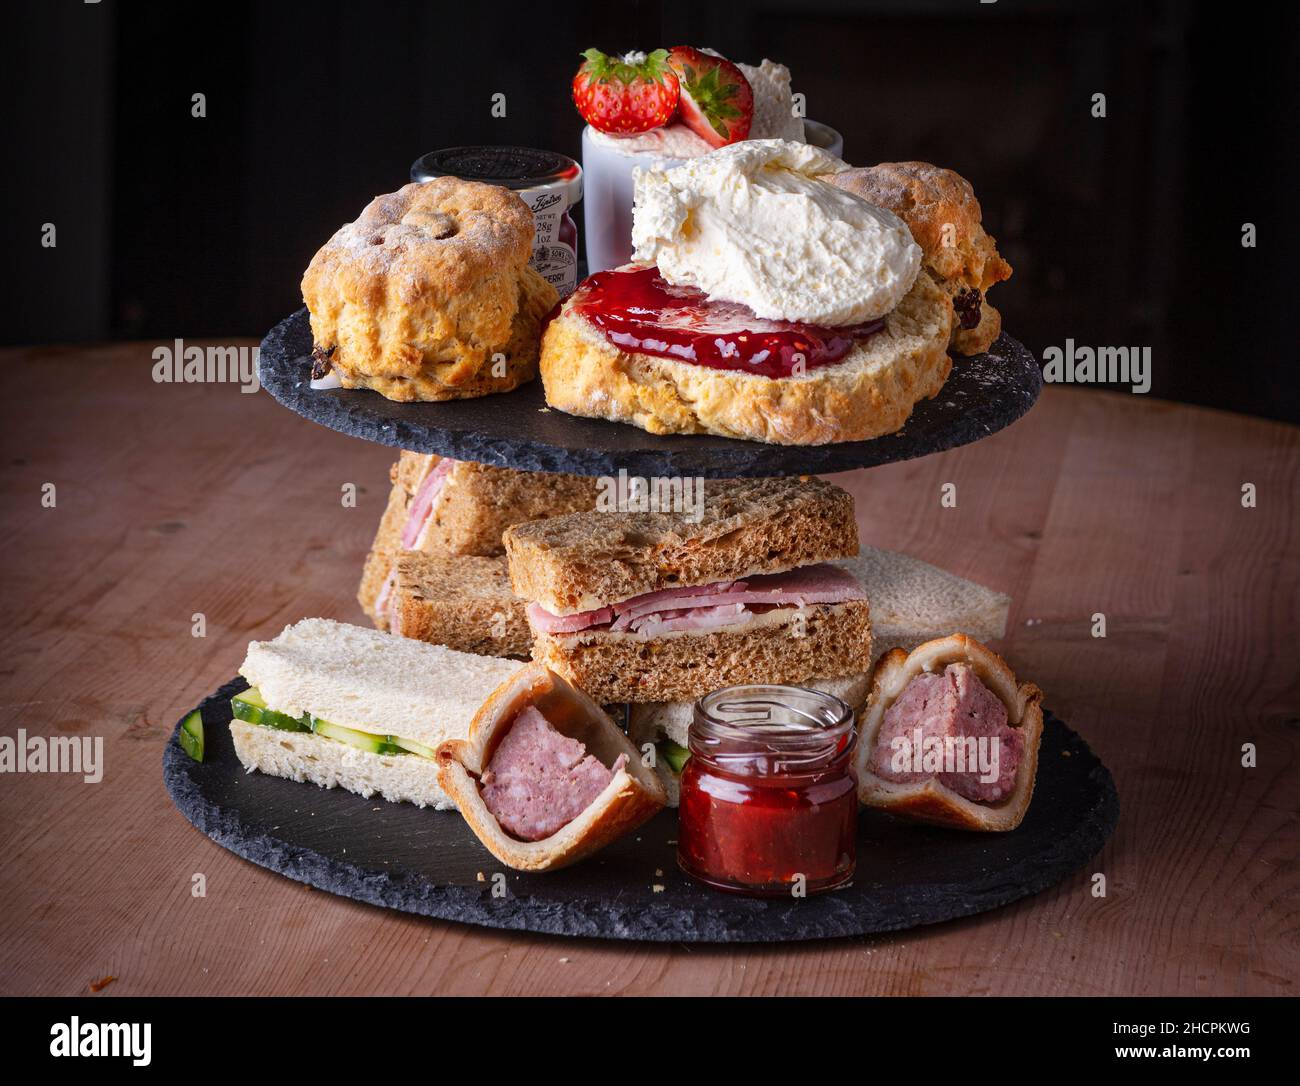 Afternoon tea with cakes and sandwiches Stock Photo